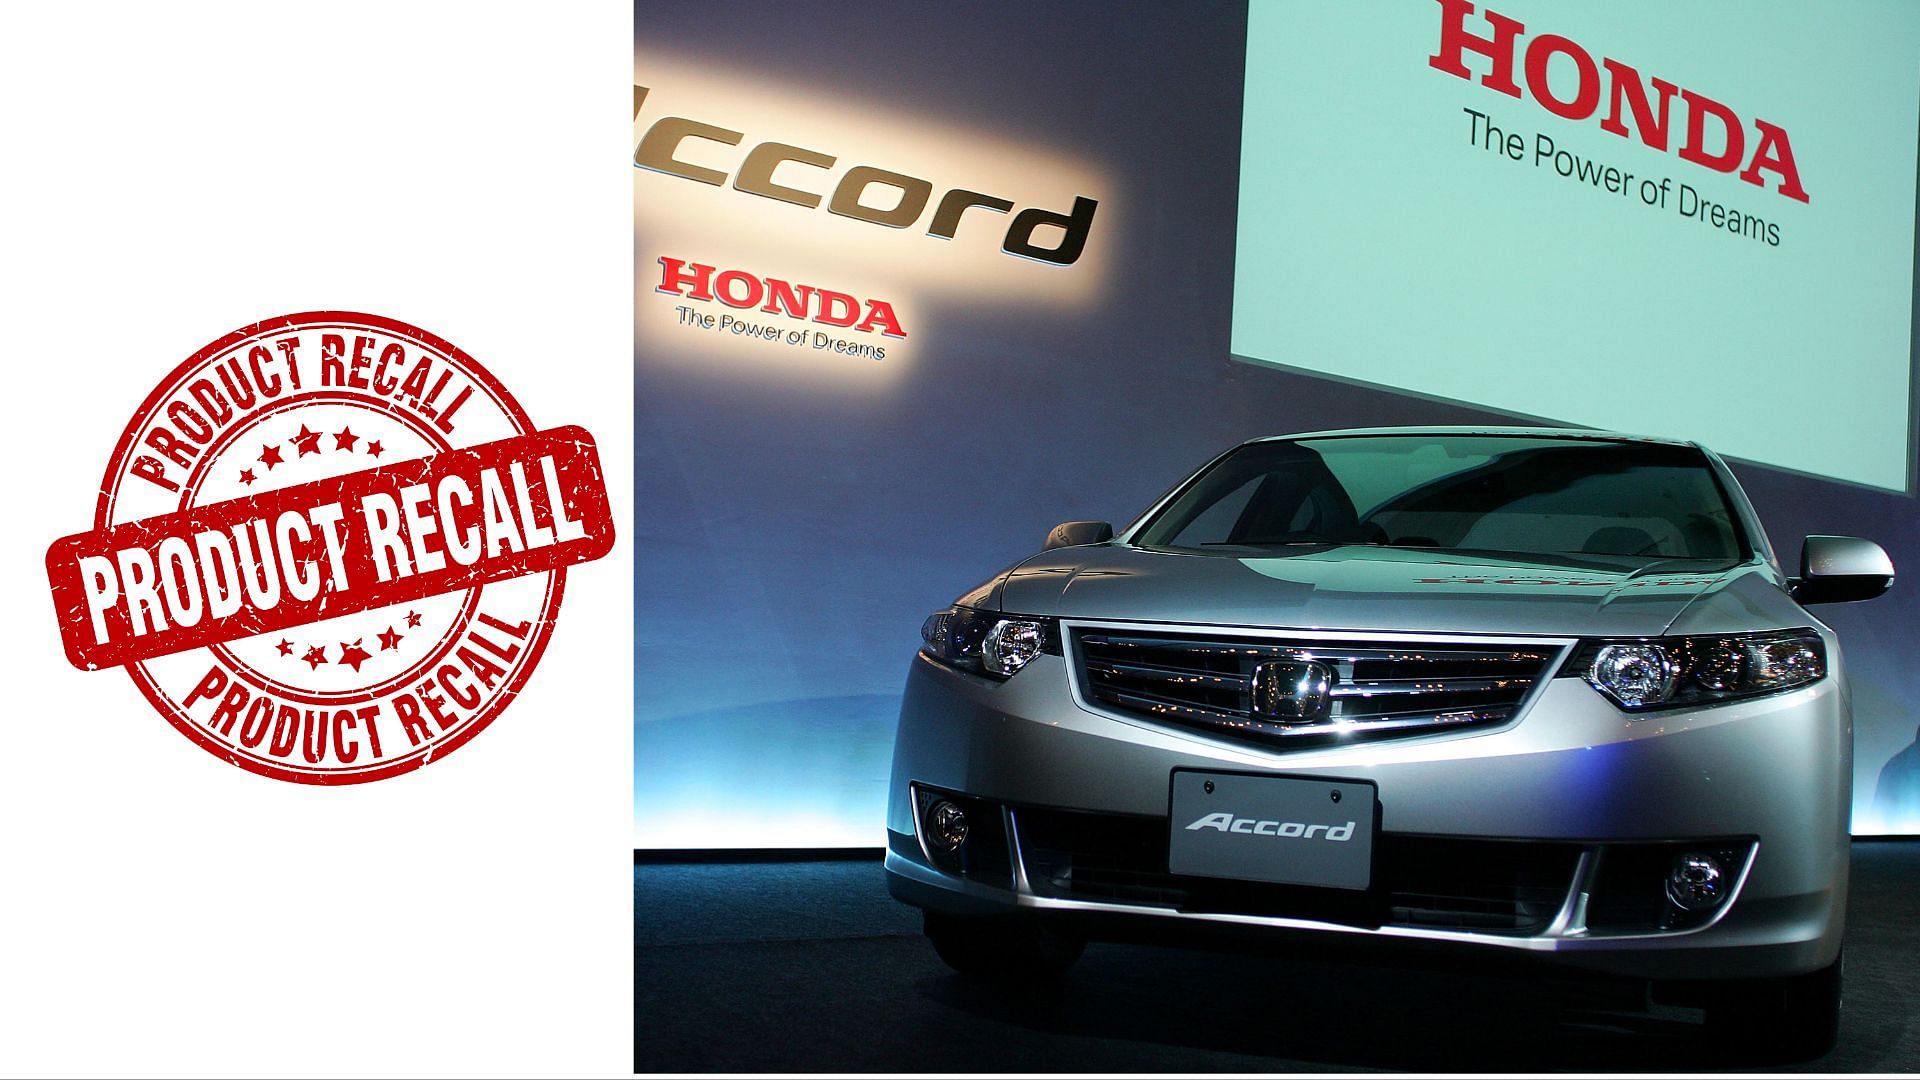 Honda Accord seat belt recall Models, replacement and all you need to know